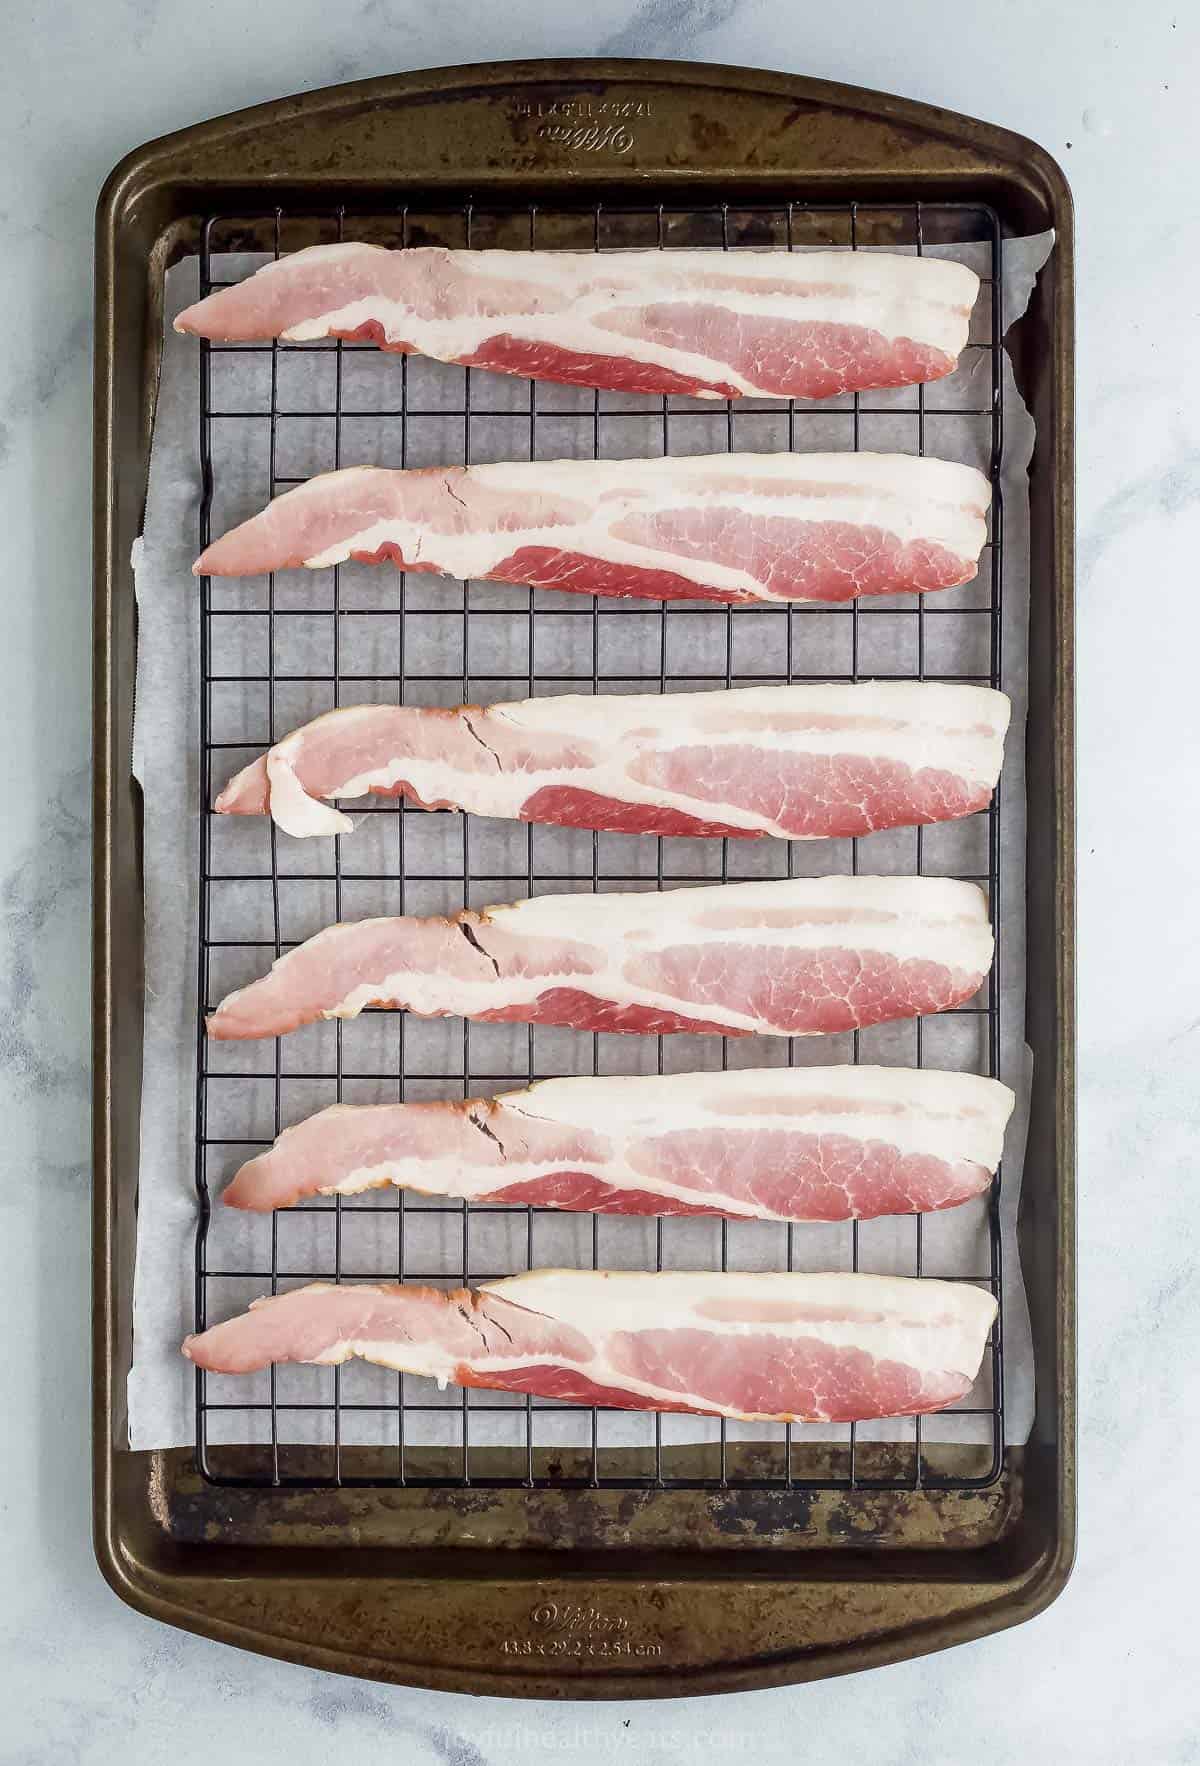 Six strips of bacon sitting on a wire rack positioned on top of a large metal baking sheet